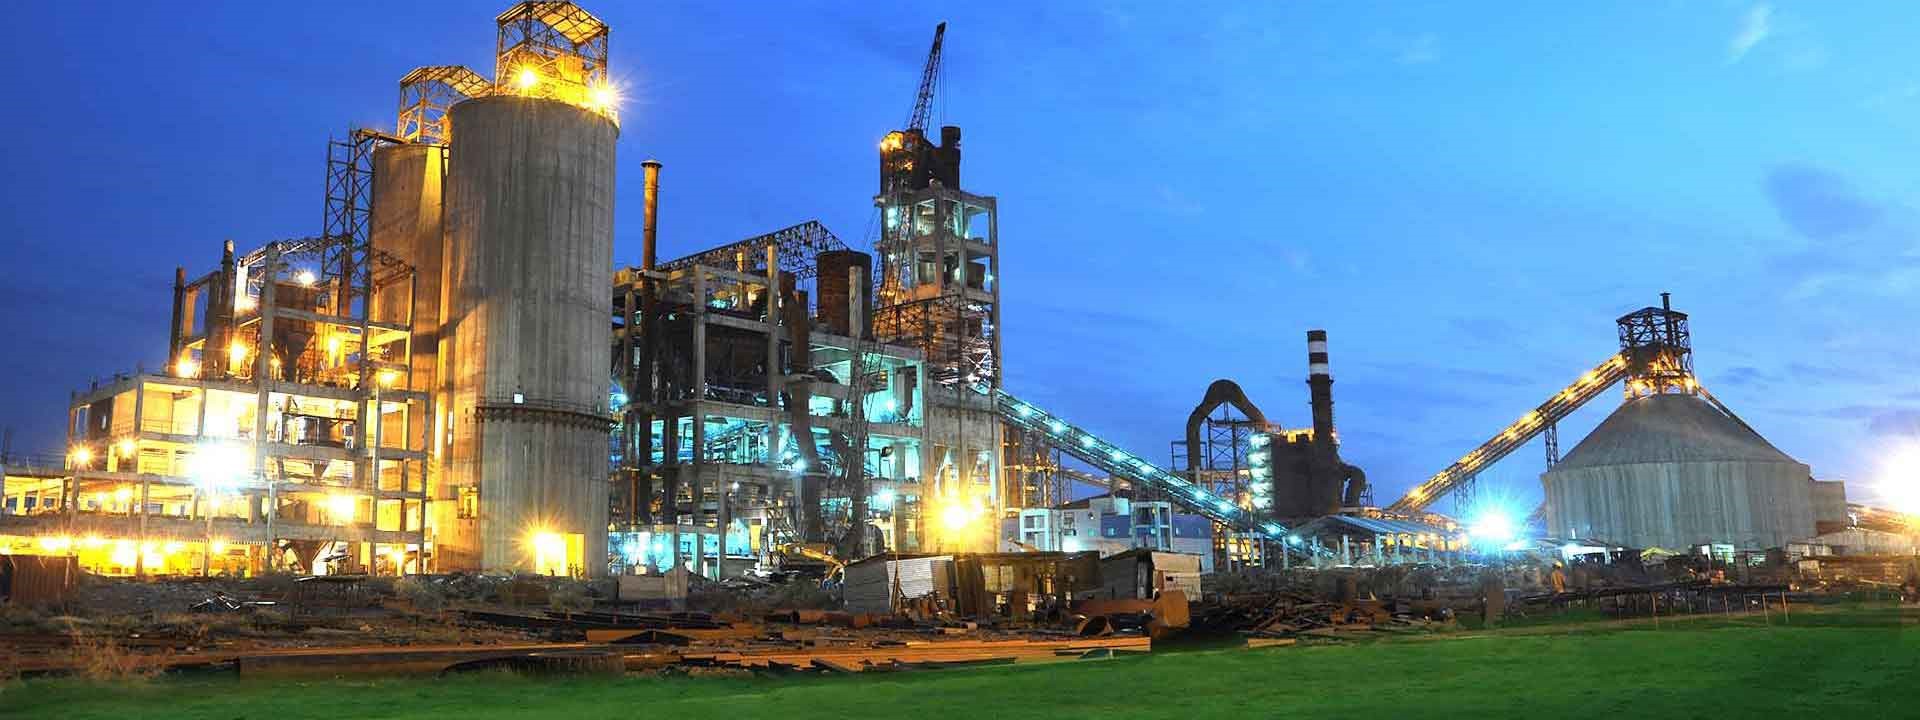 Cement factory in Andhra pradesh- L&T Construction